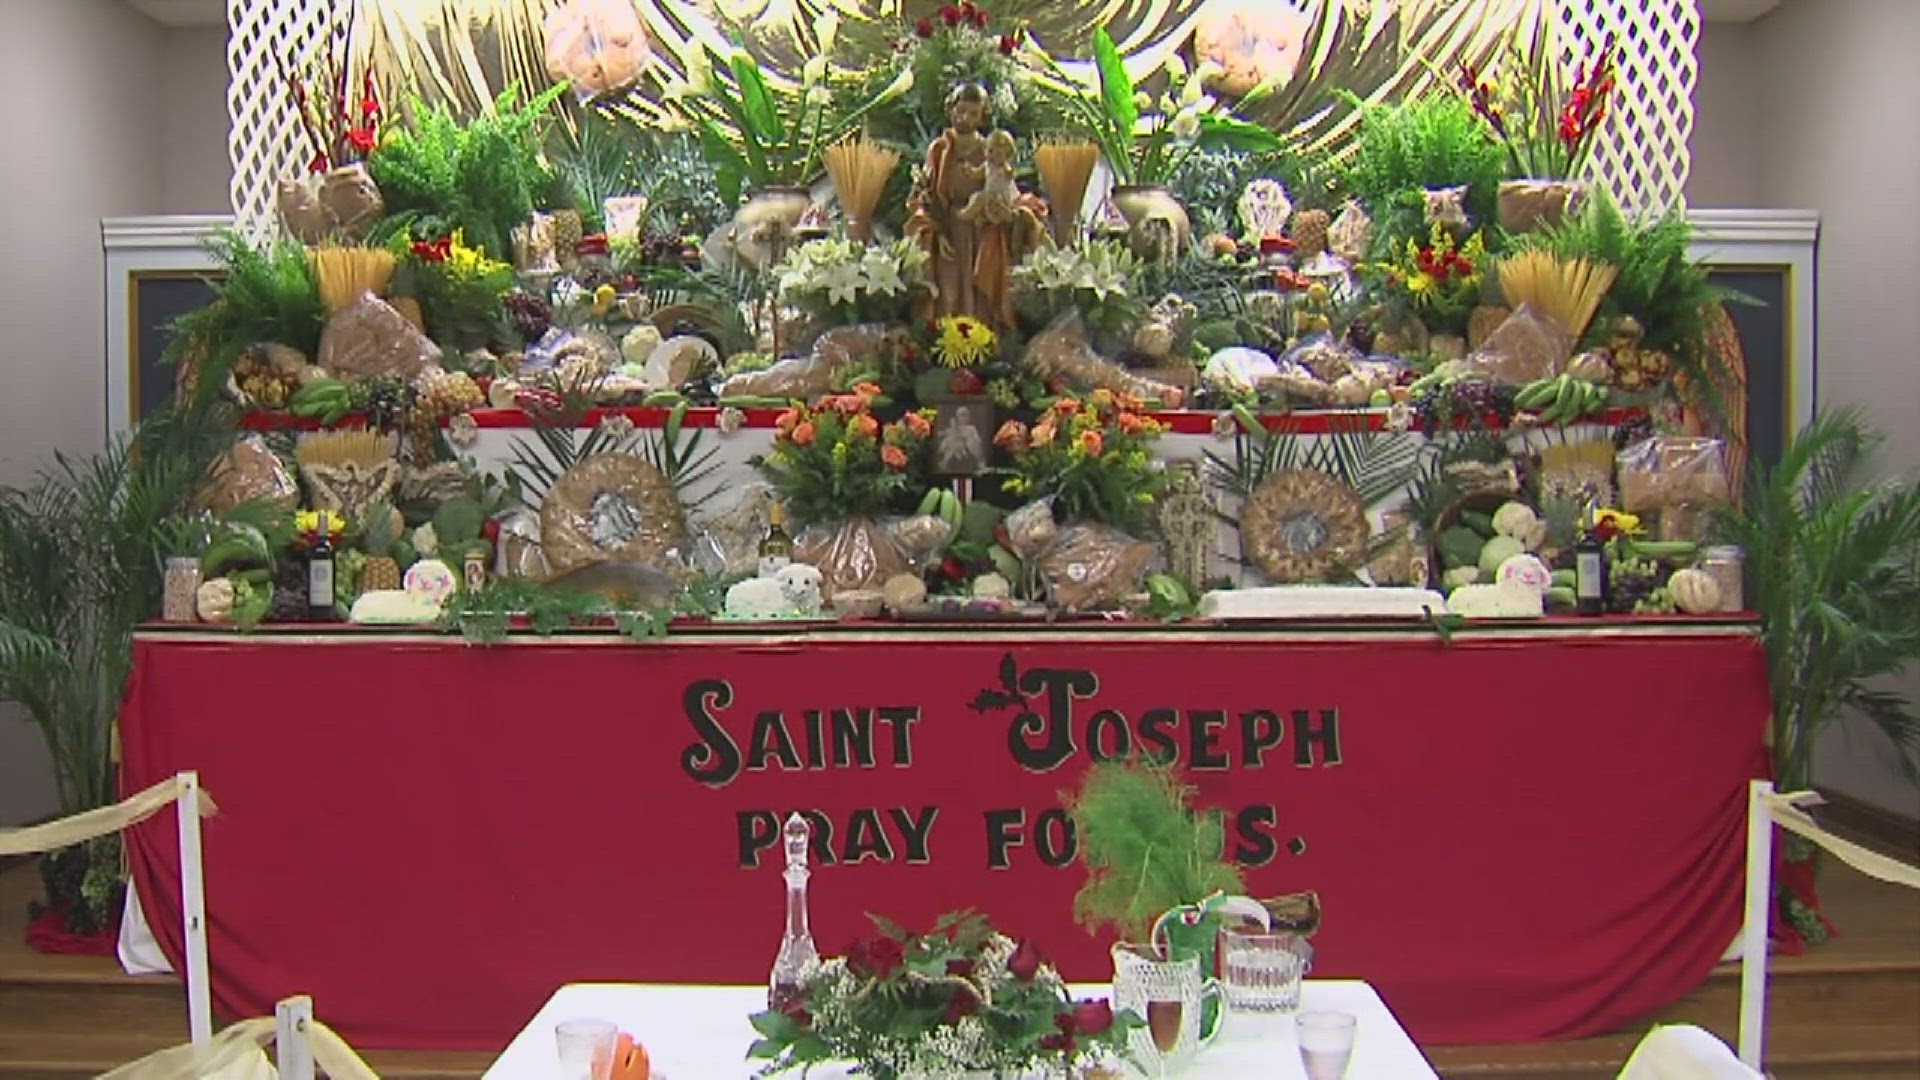 The event is all about celebrating the history of St. Joseph.